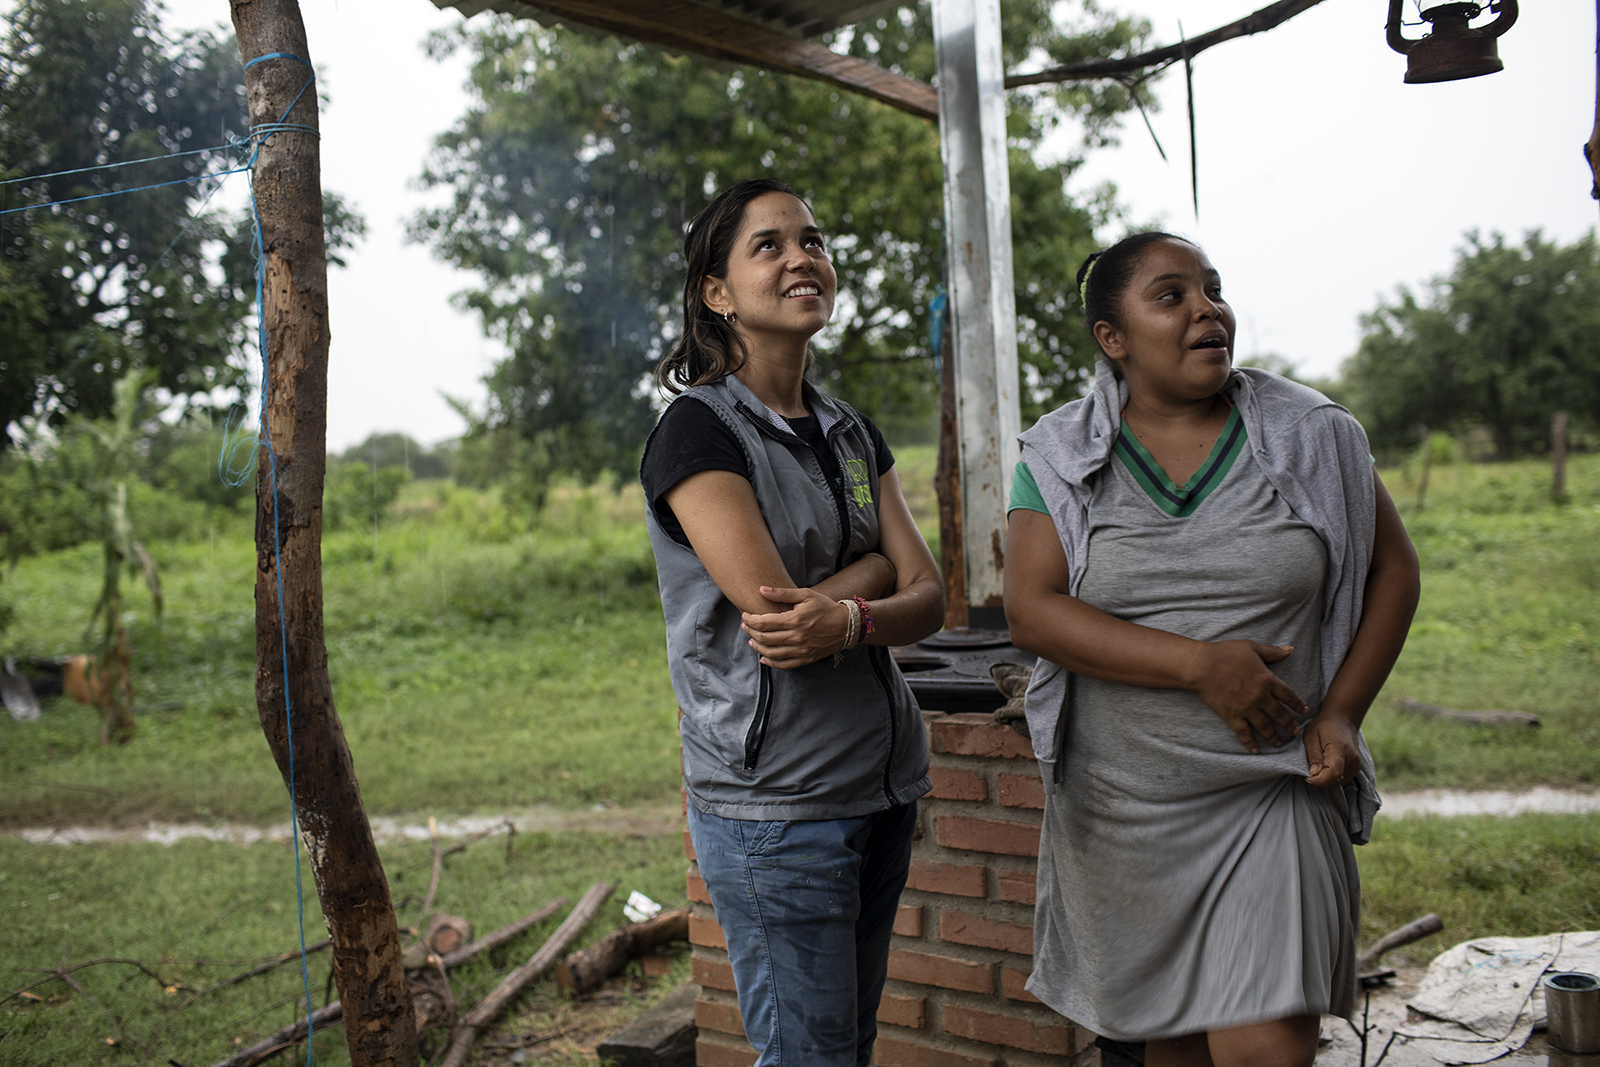 Tierra Grata co-founder and CEO Jenifer Colpas Fernández, left, visits a rural Colombian area in Aug. 2021. Photo by Juanita Escobar, courtesy of Tierra Grata